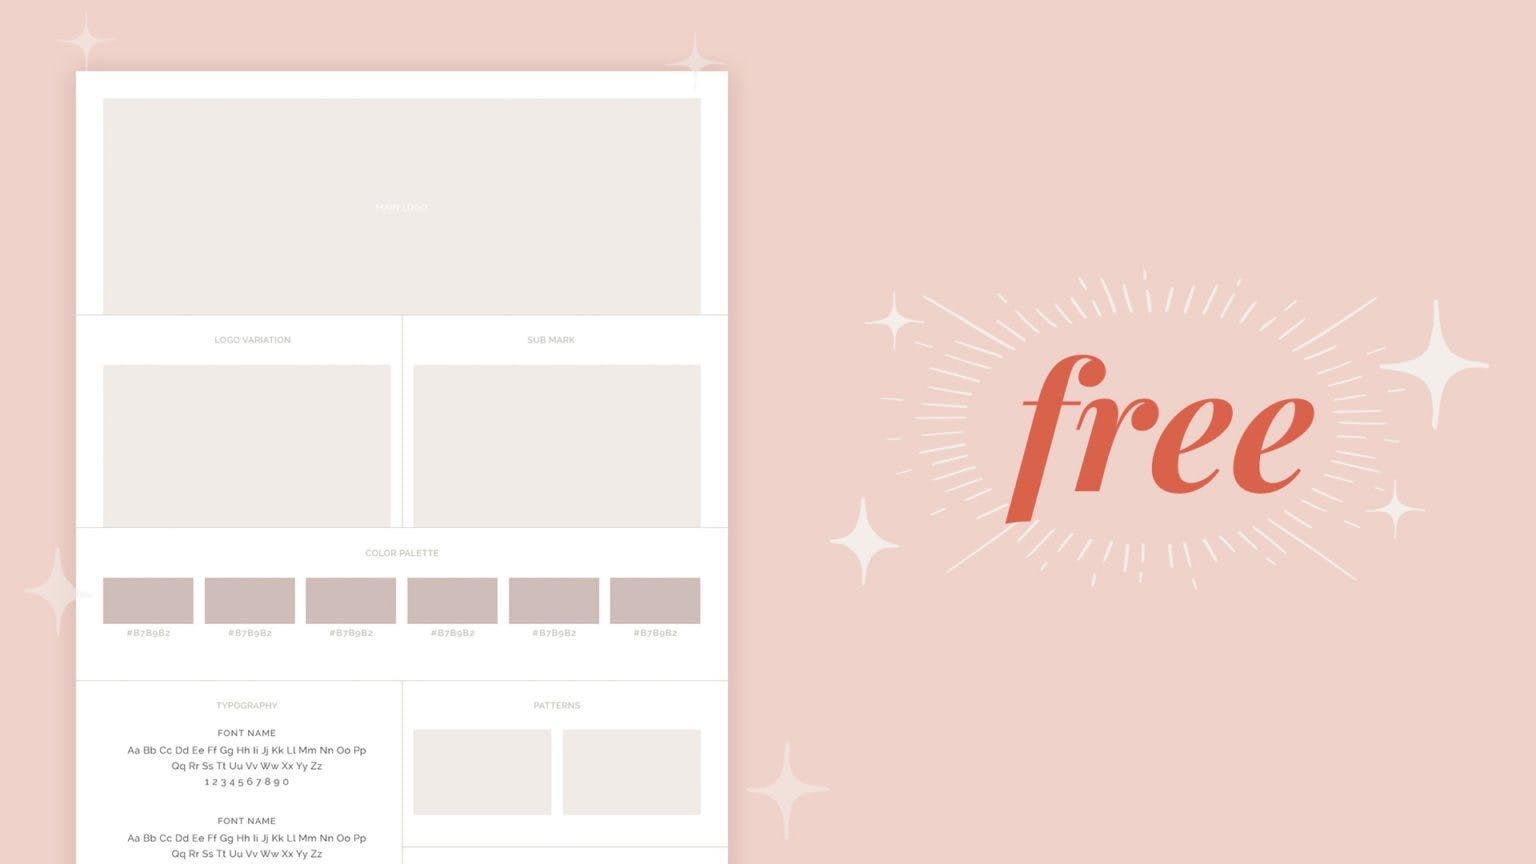 Brand board template from Amber & Ink